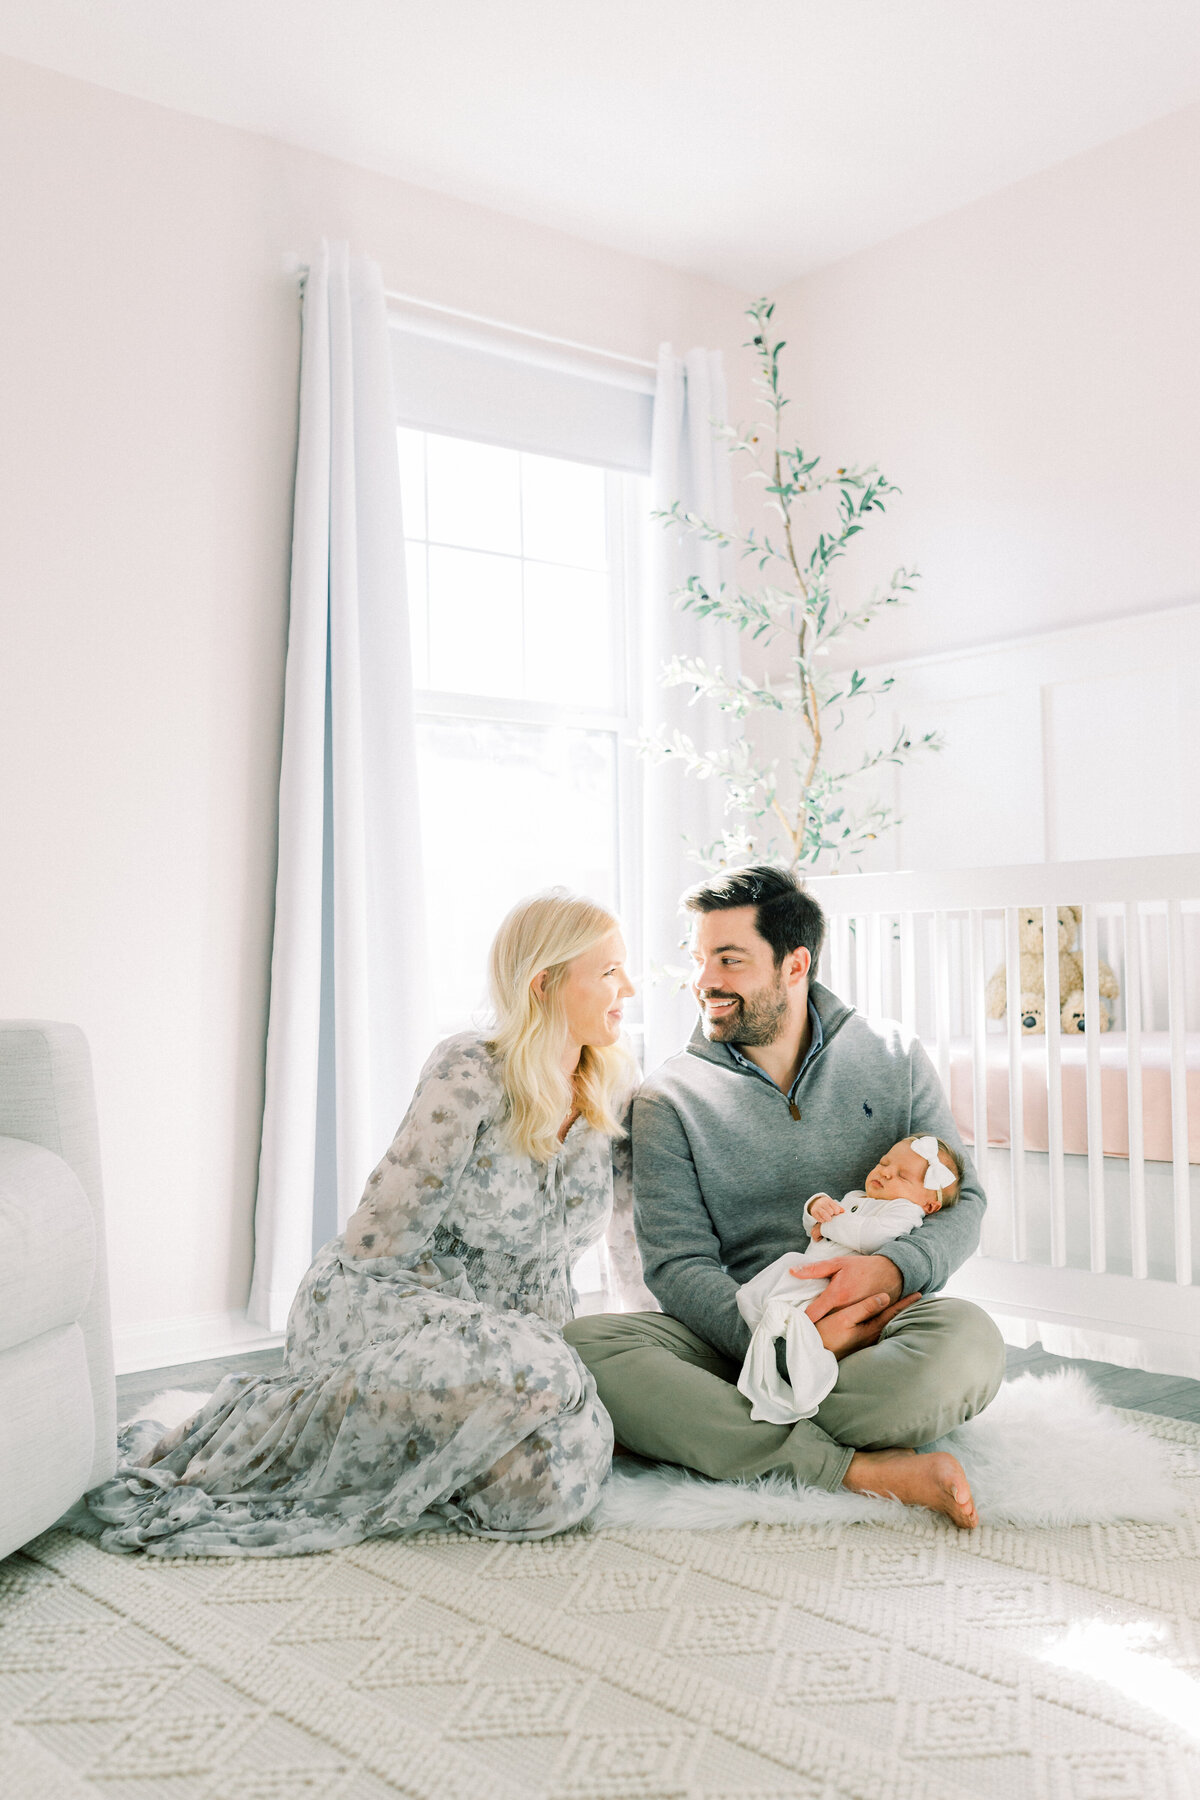 Donnelly-Madeleine-KatelynNgPhotography-107